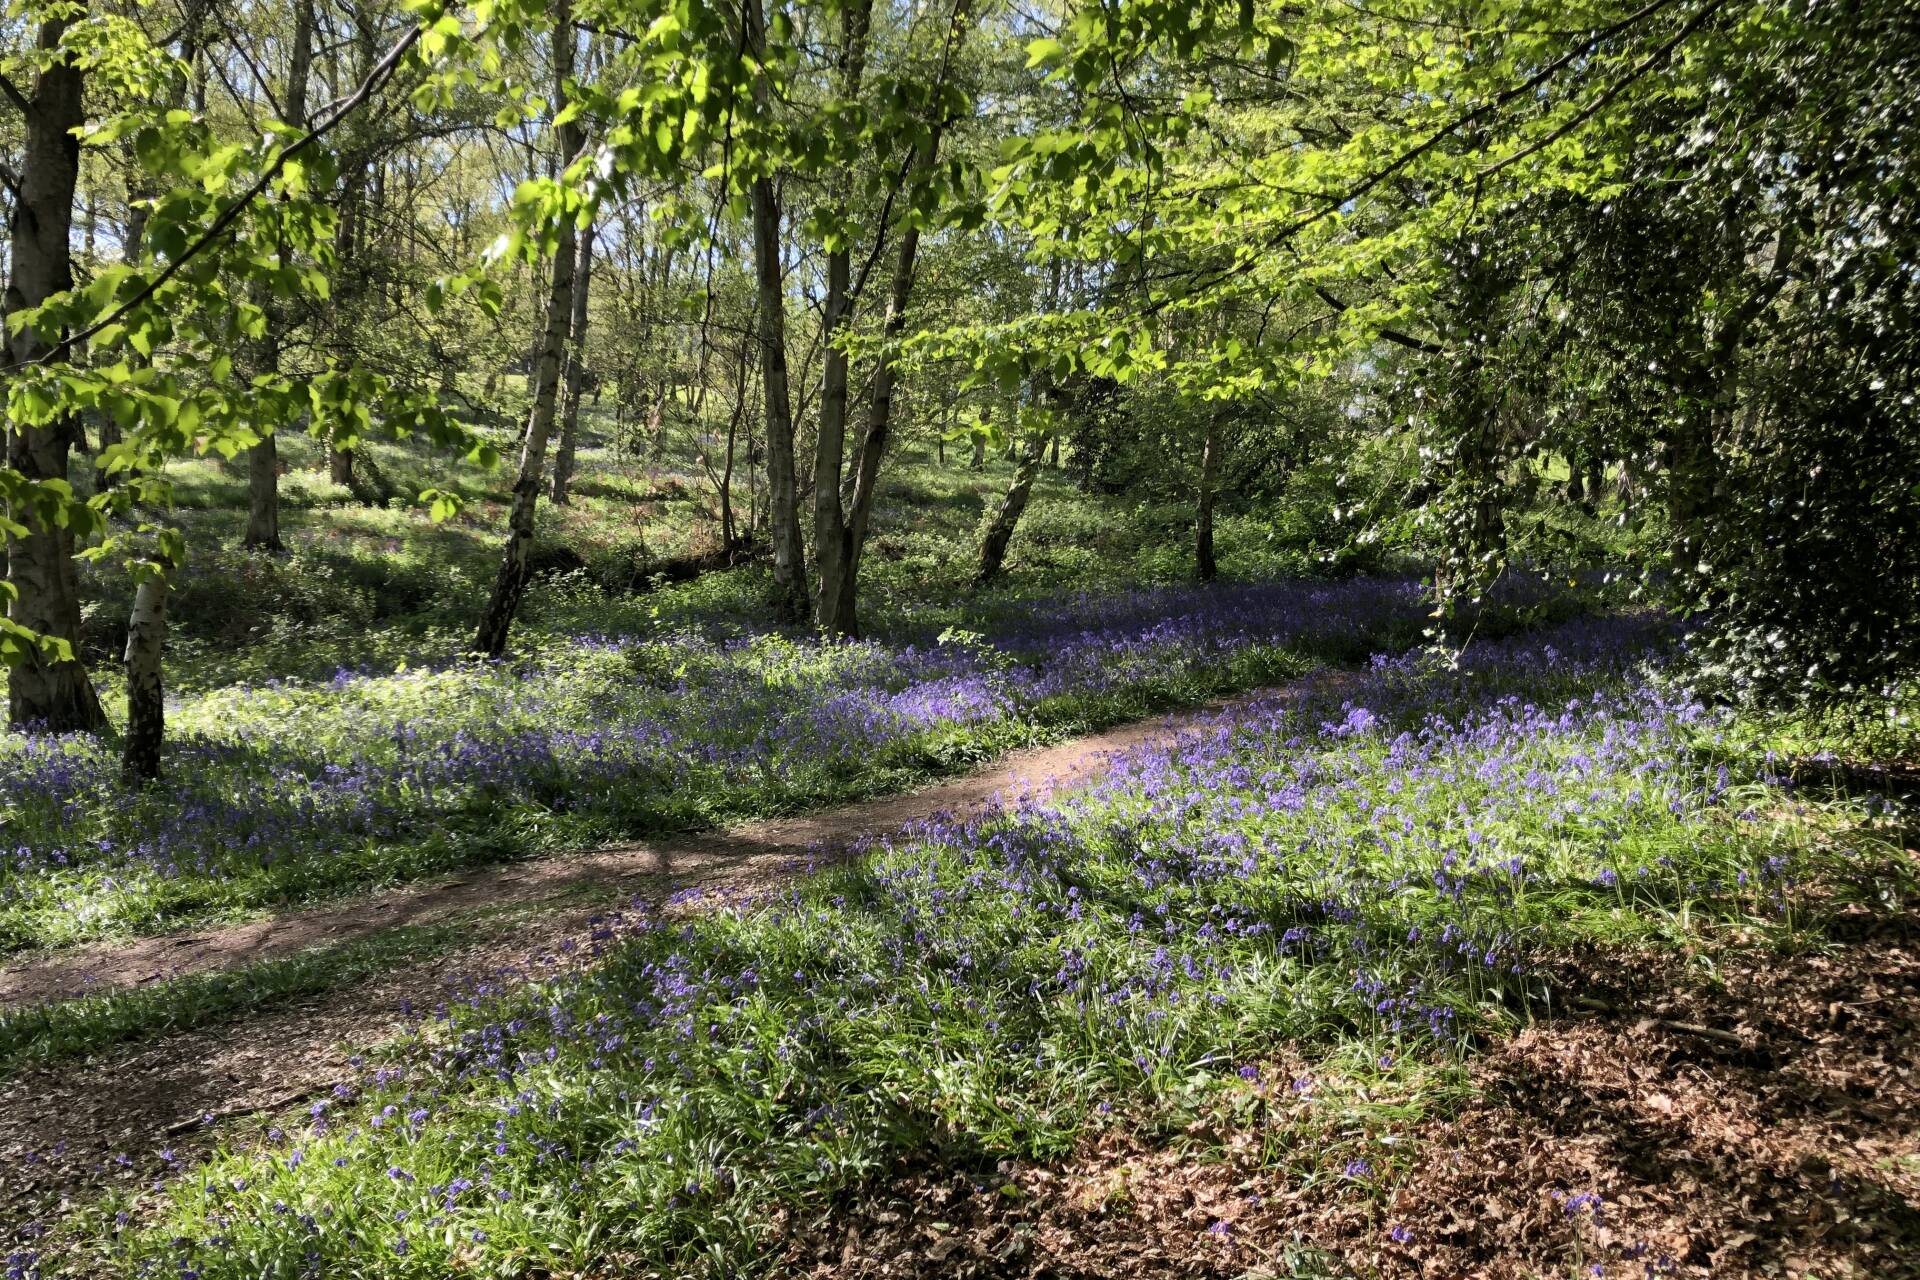 The bluebell woods. Trees and bluebells along a dirt path.